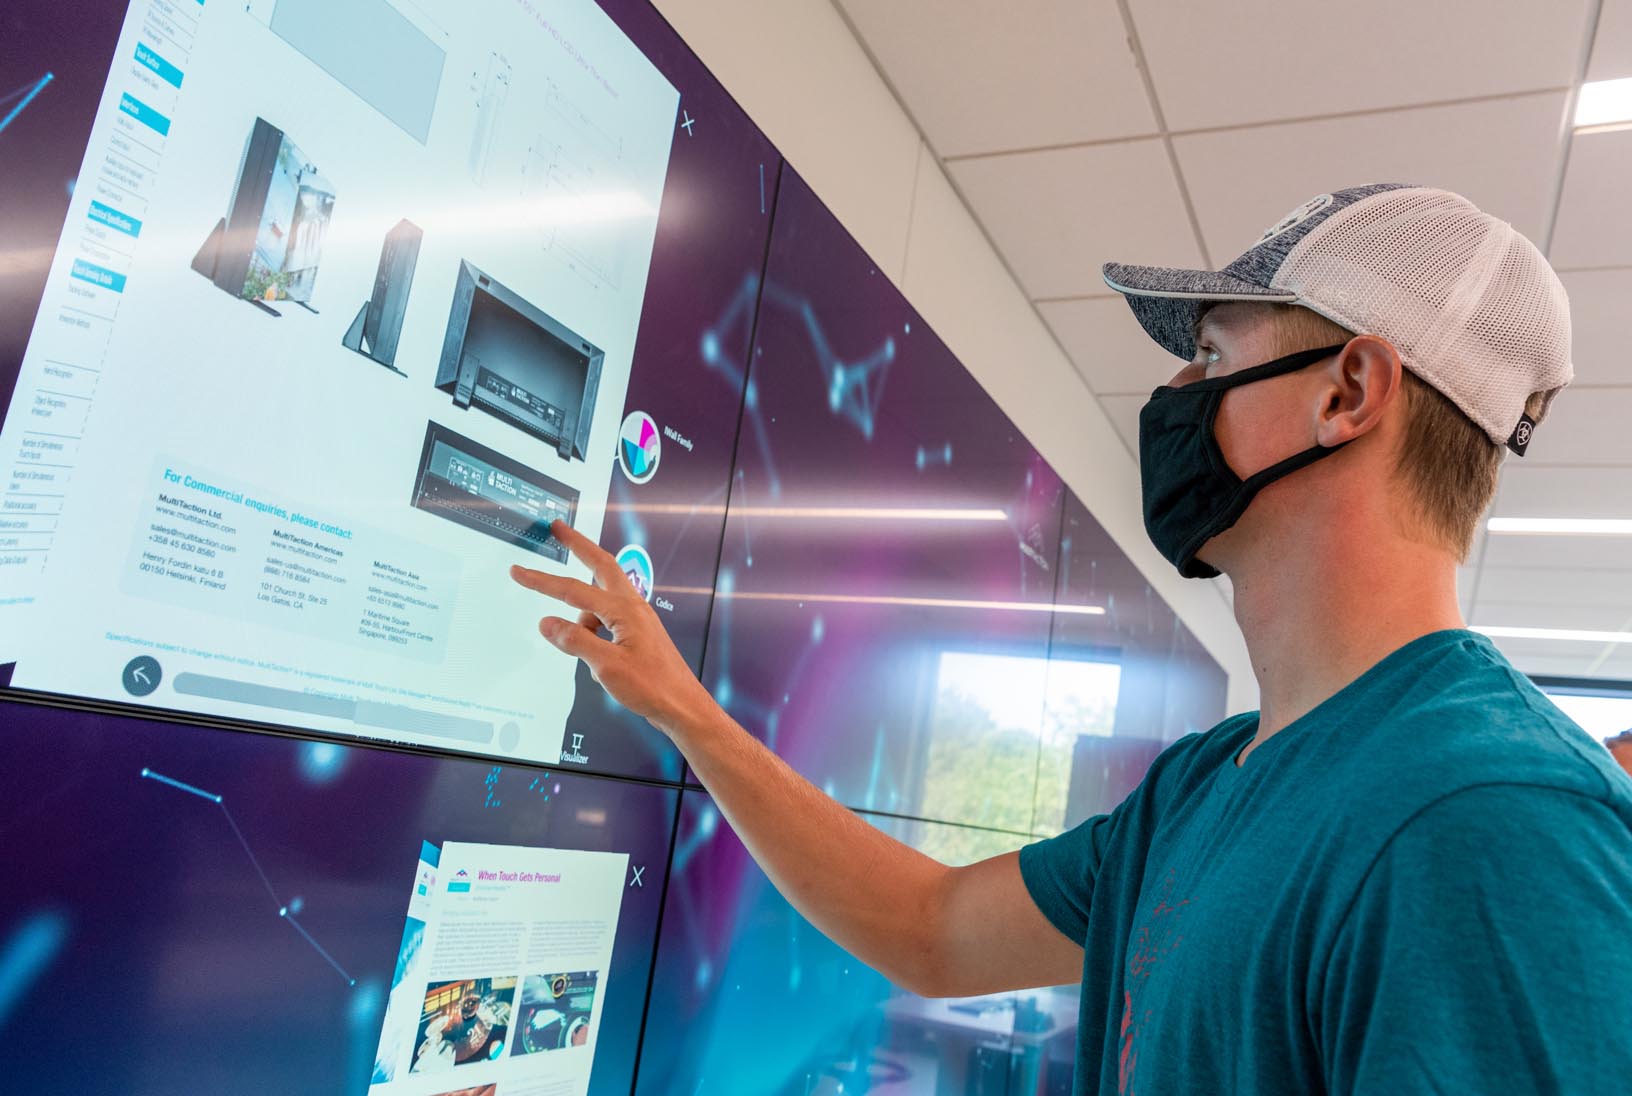 Discovery Hall is equipped with a large, touchscreen video wall and other cutting-edge technology to train students for the high-skill, high-wage STEM positions in demand across the state and country.